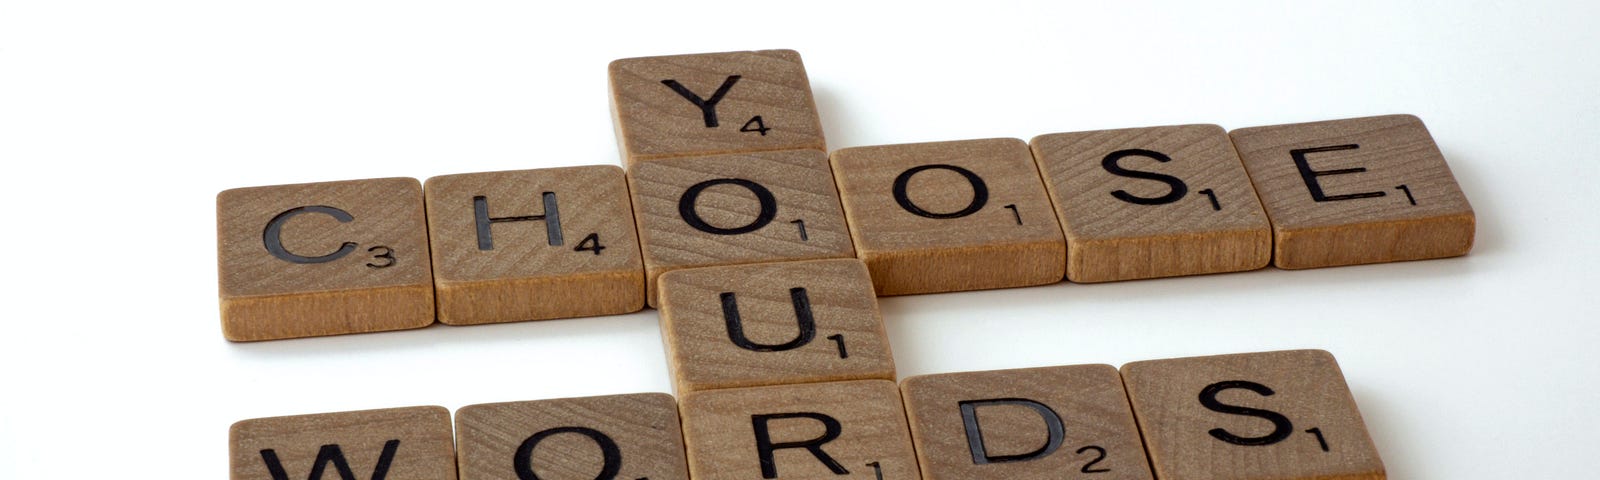 Interlinked wooden letter tiles spell out the phrase “CHOOSE YOUR WORDS” on a white background